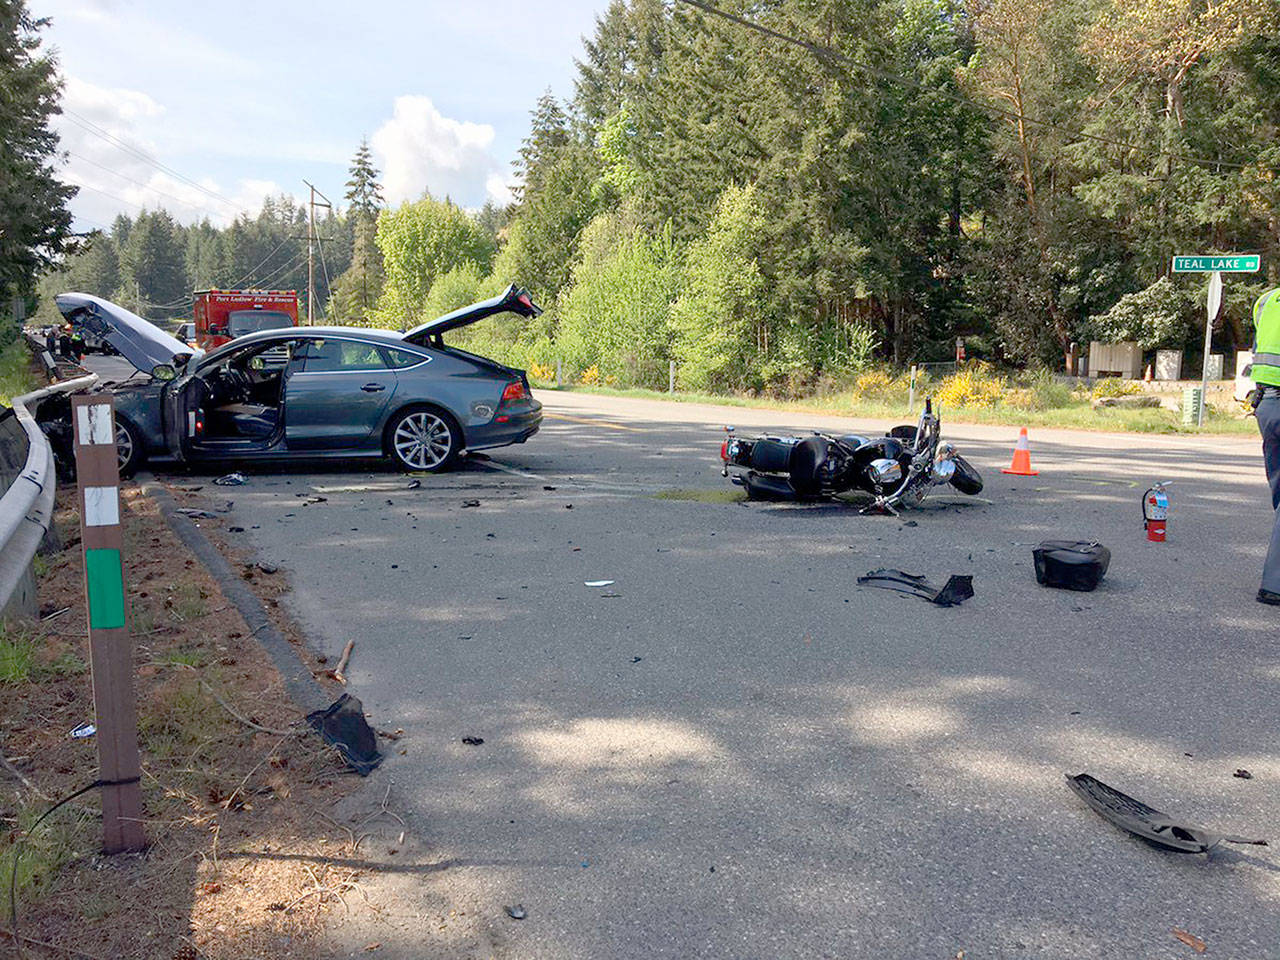 A Port Ludlow man was killed when his motorcycle struck a car on state Highway 104 west of the Hood Canal Bridge on Friday. (Washington State Patrol)